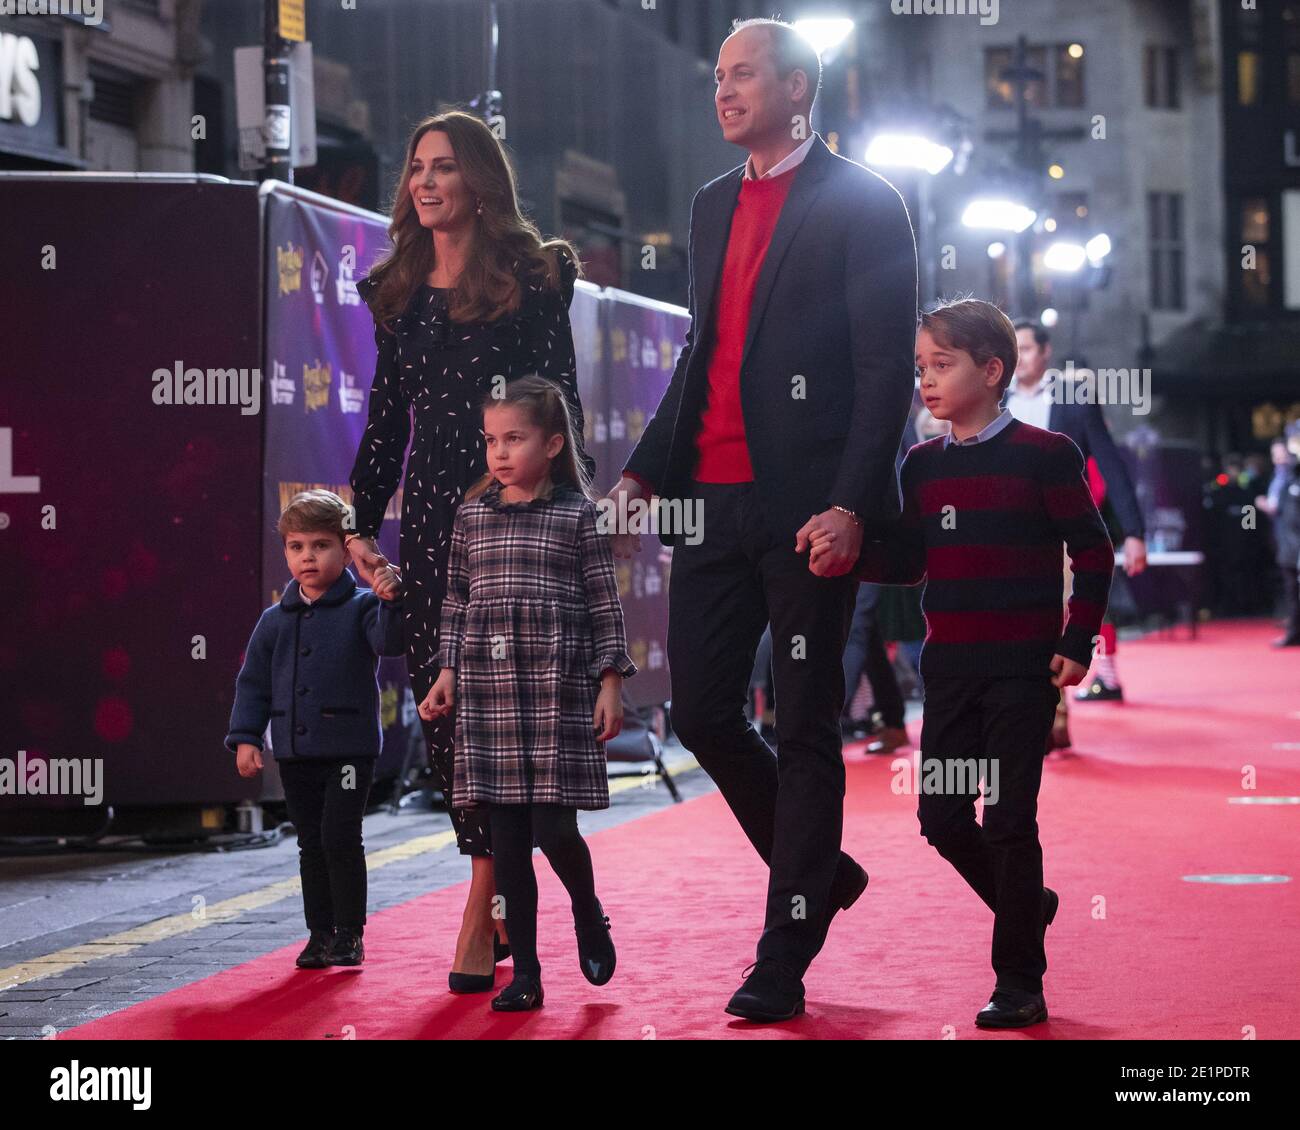 File photo dated 11/12/20 of the Duke and Duchess of Cambridge and their children, Prince Louis, Princess Charlotte and Prince George attending a special pantomime performance at London's Palladium Theatre, hosted by The National Lottery, to thank key workers and their families for their efforts throughout the pandemic. The Duchess of Cambridge celebrates her 39th birthday as the royal family, like the rest of nation, continues to live under lockdown. Stock Photo